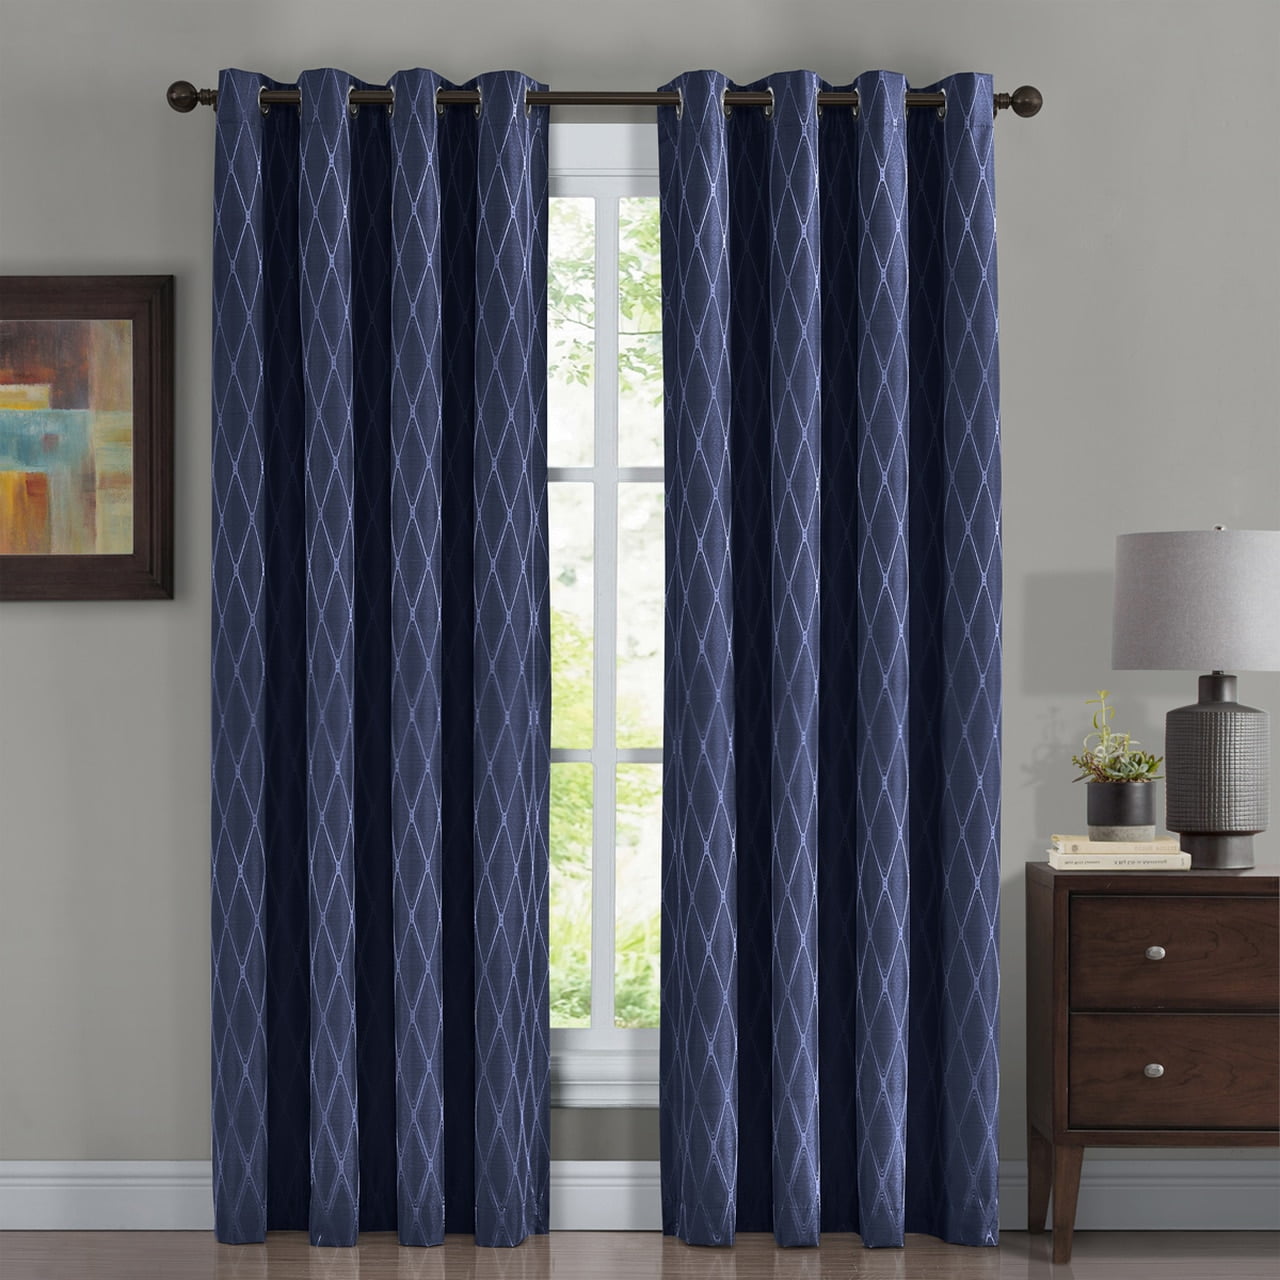 HILTON Window Treatment Thermal Insulated Grommet Blackout Curtains /Drapes PAIR 